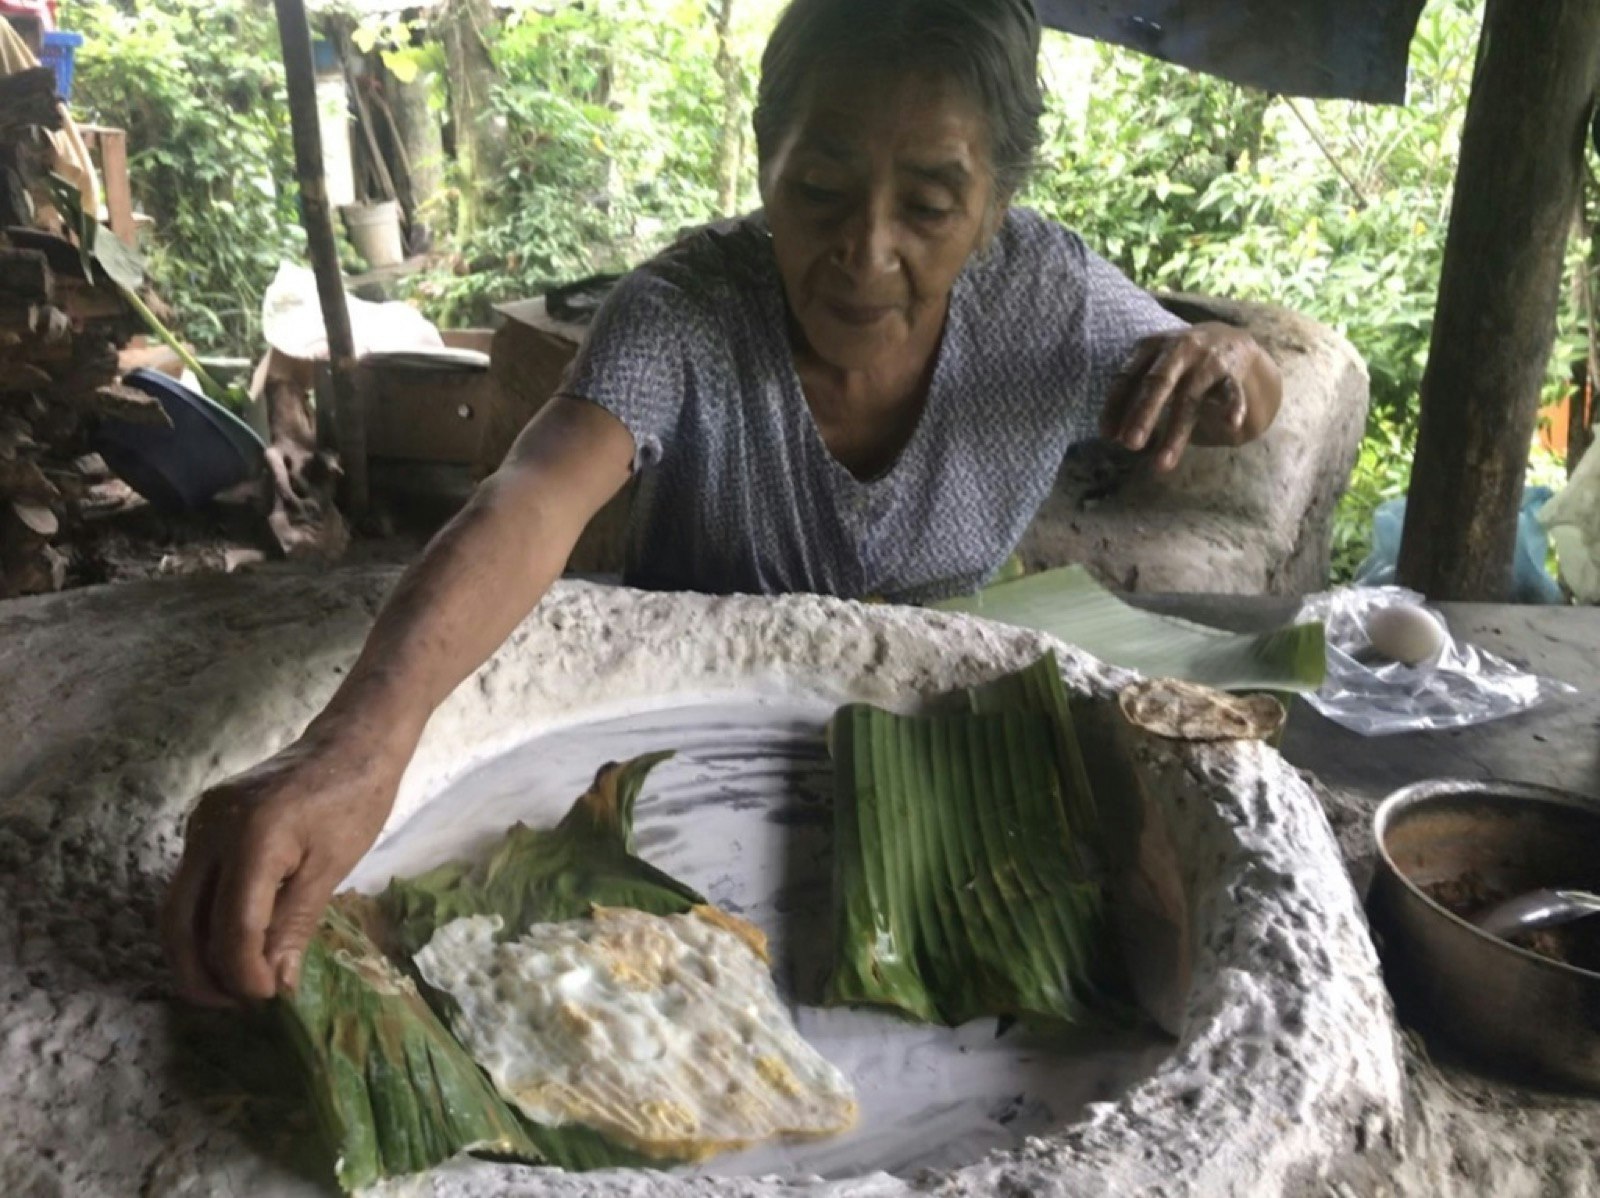 A woman leans over a stone structure as she prepares to fold a banana leaf over fried eggs; Xantolo